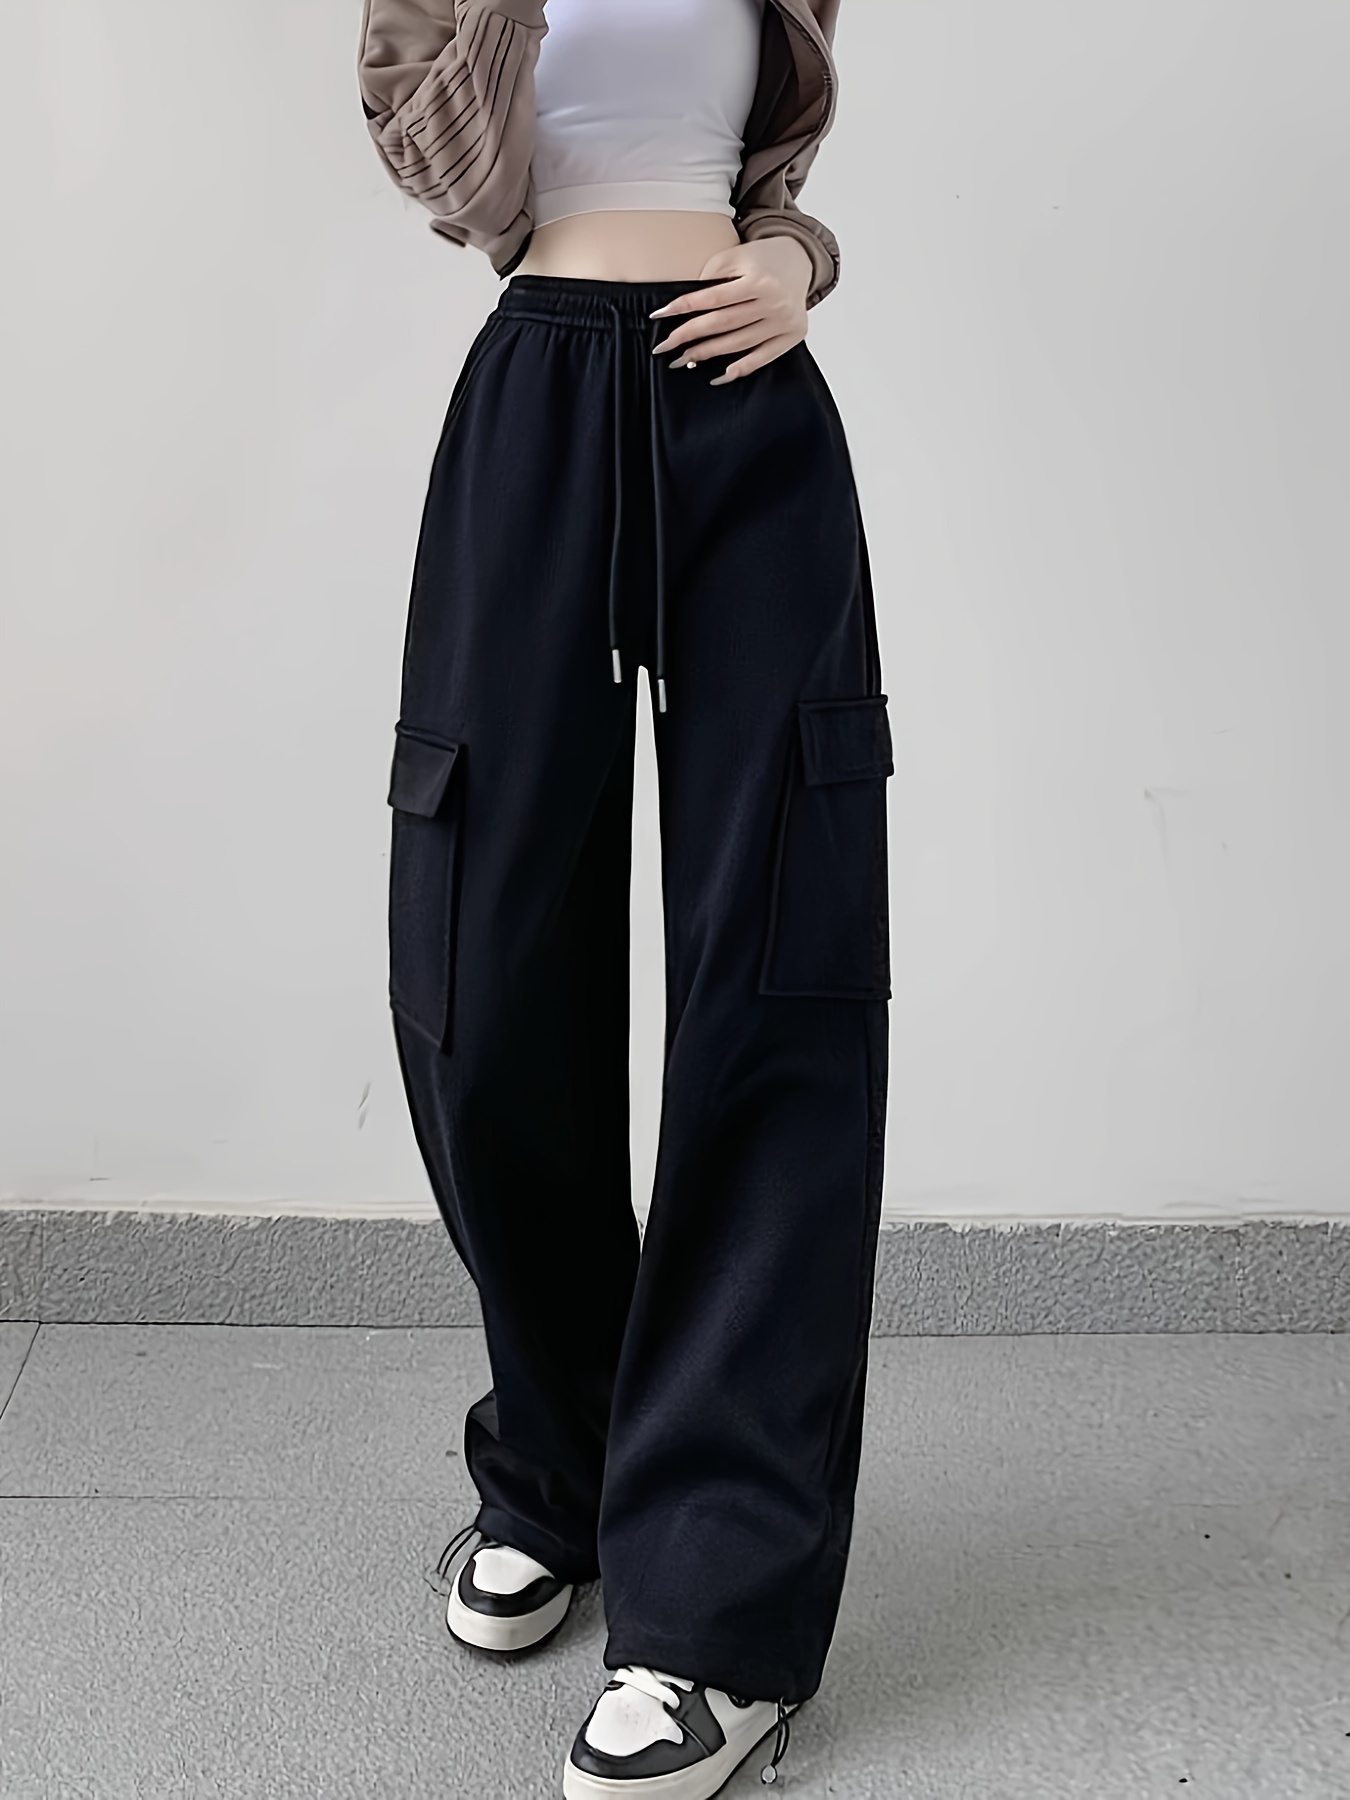  Women's High Waisted Sweatpants High Waisted Lounge Pants for  Women Cargo Sweatpants for Women Womens Sweatpants Cargo Pants Women Sales  Clearance Deals : Clothing, Shoes & Jewelry